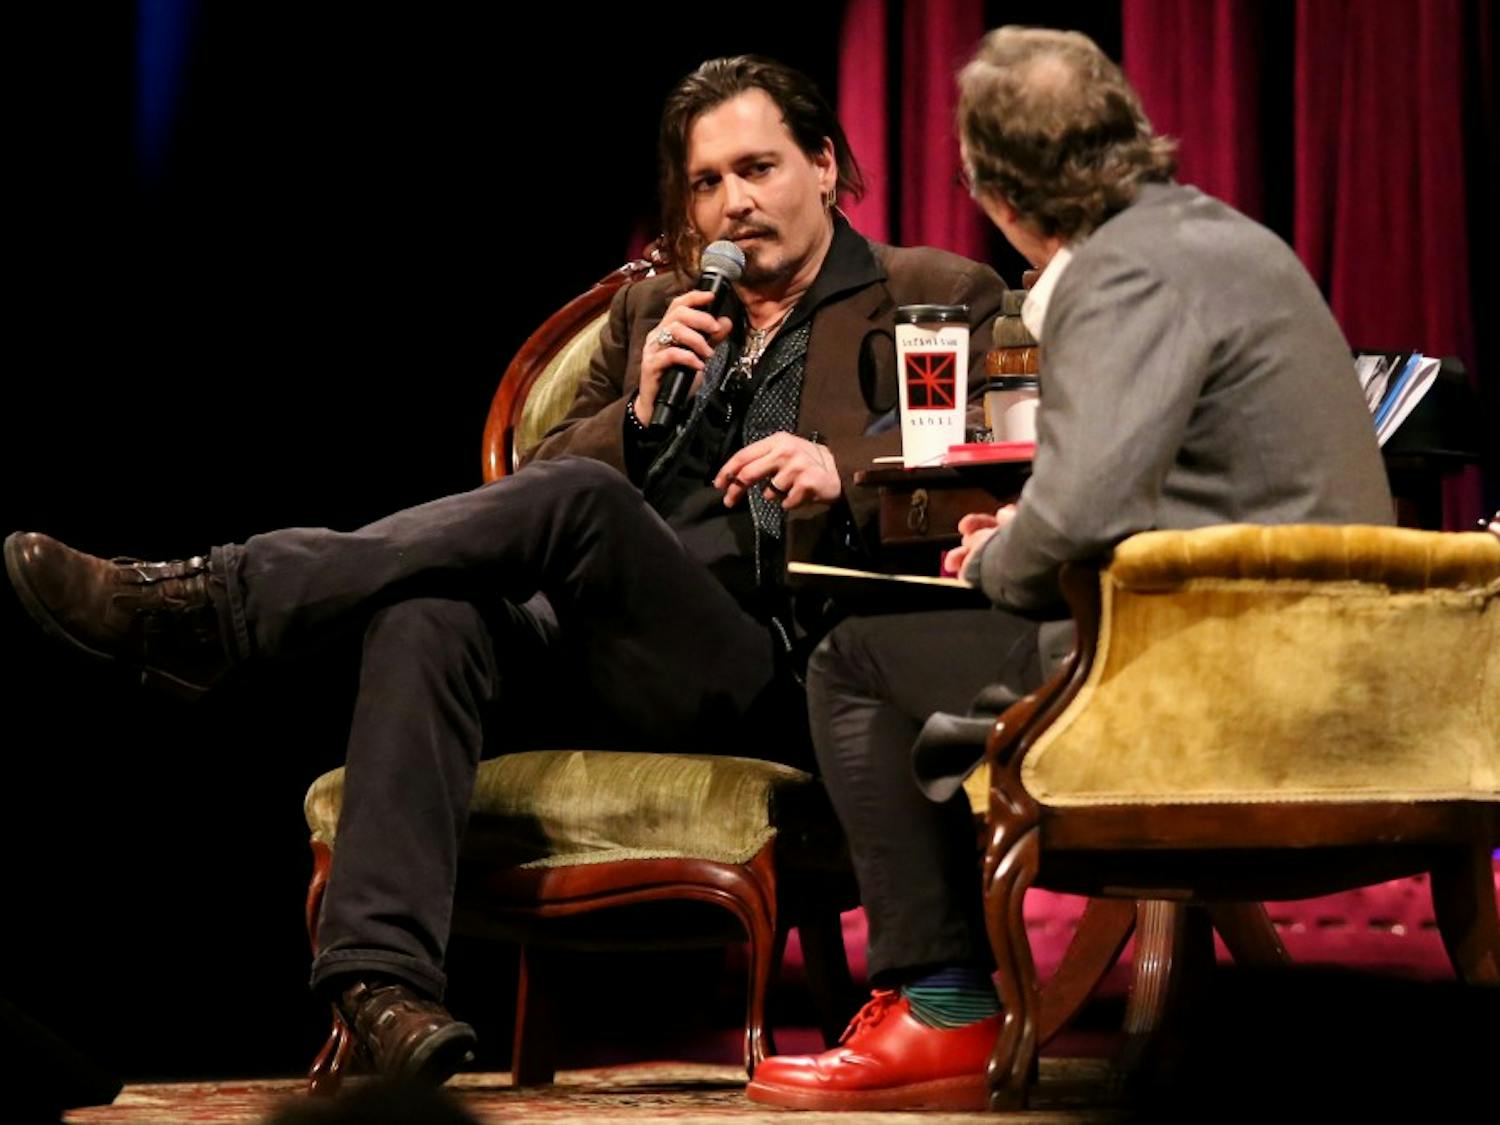 Johnny Depp speaks with Professor Lawrence Krauss during his talk 'Finding Creativity in Madness' at ASU Gammage on Saturday, March 12, 2016, as a part of the Origins Project. Lawrence 